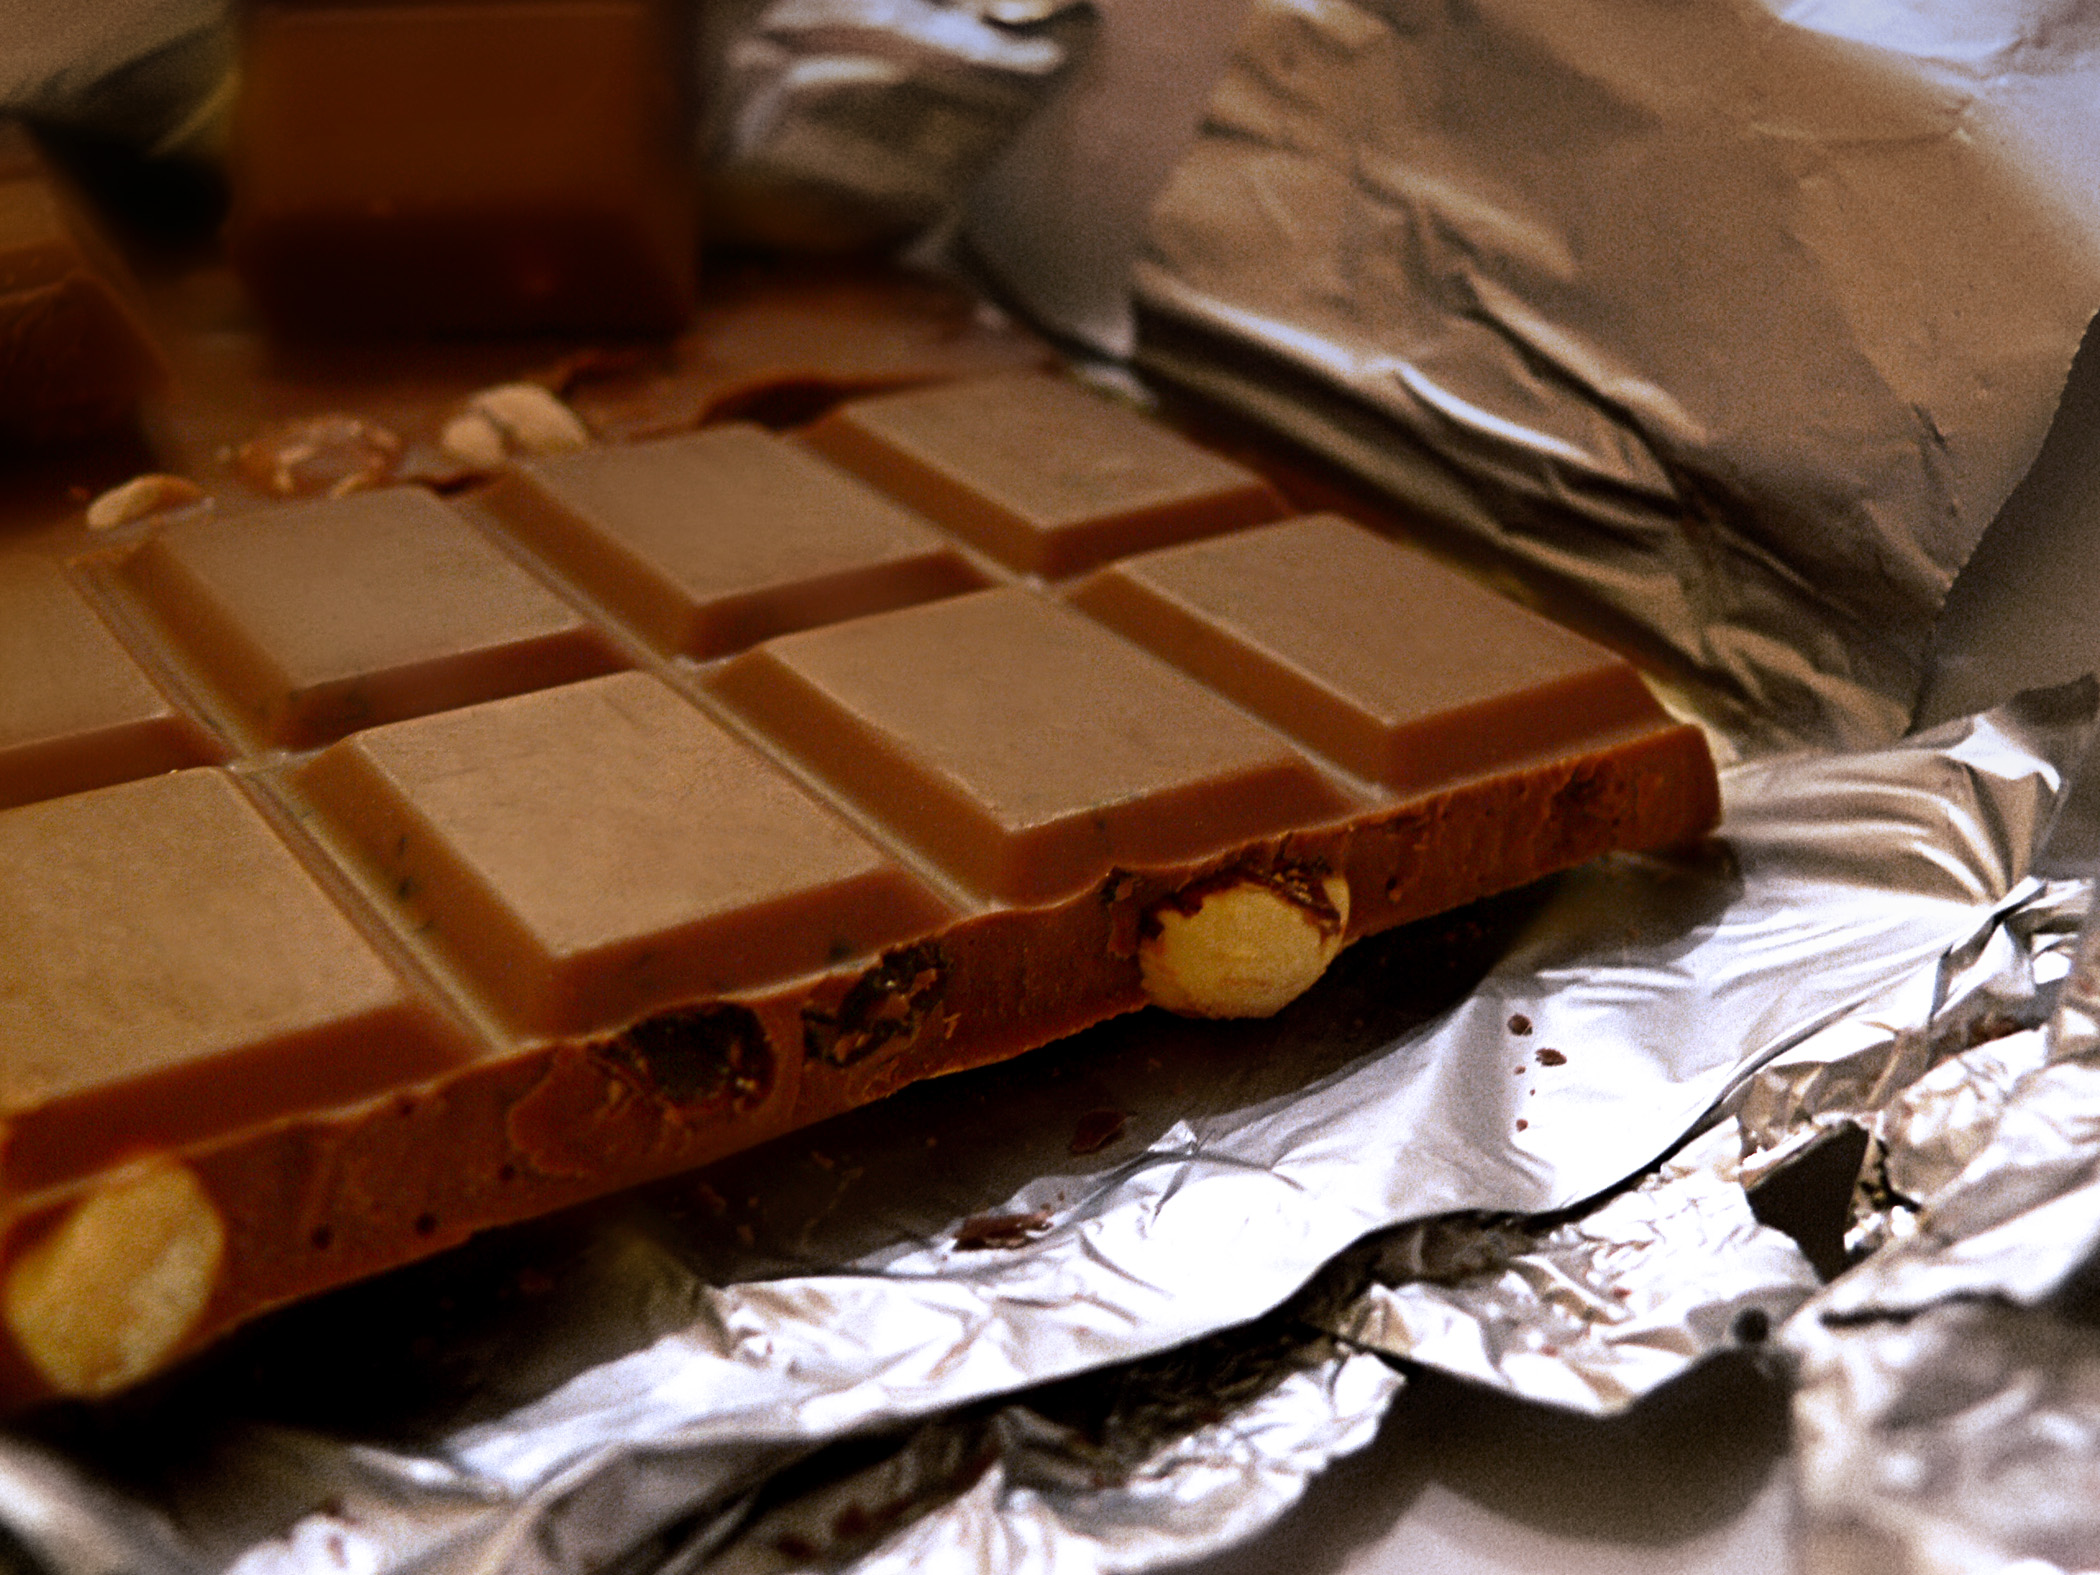 Chocolate bar with nuts on a foil wrapper